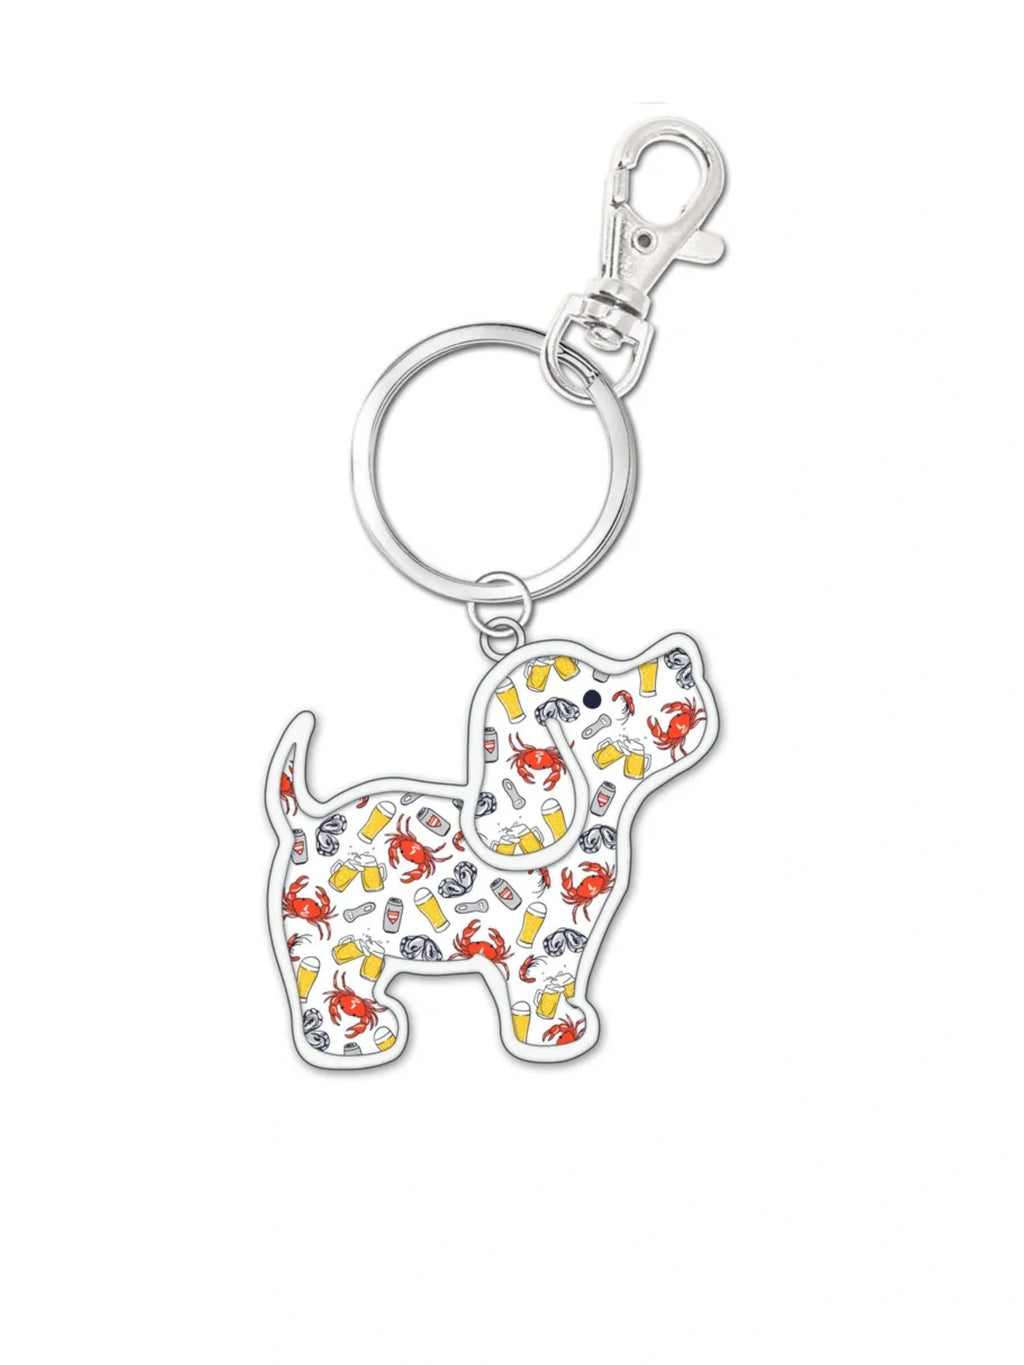 CRABS AND BEER PATTERN PUP KEY RING - Puppie Love